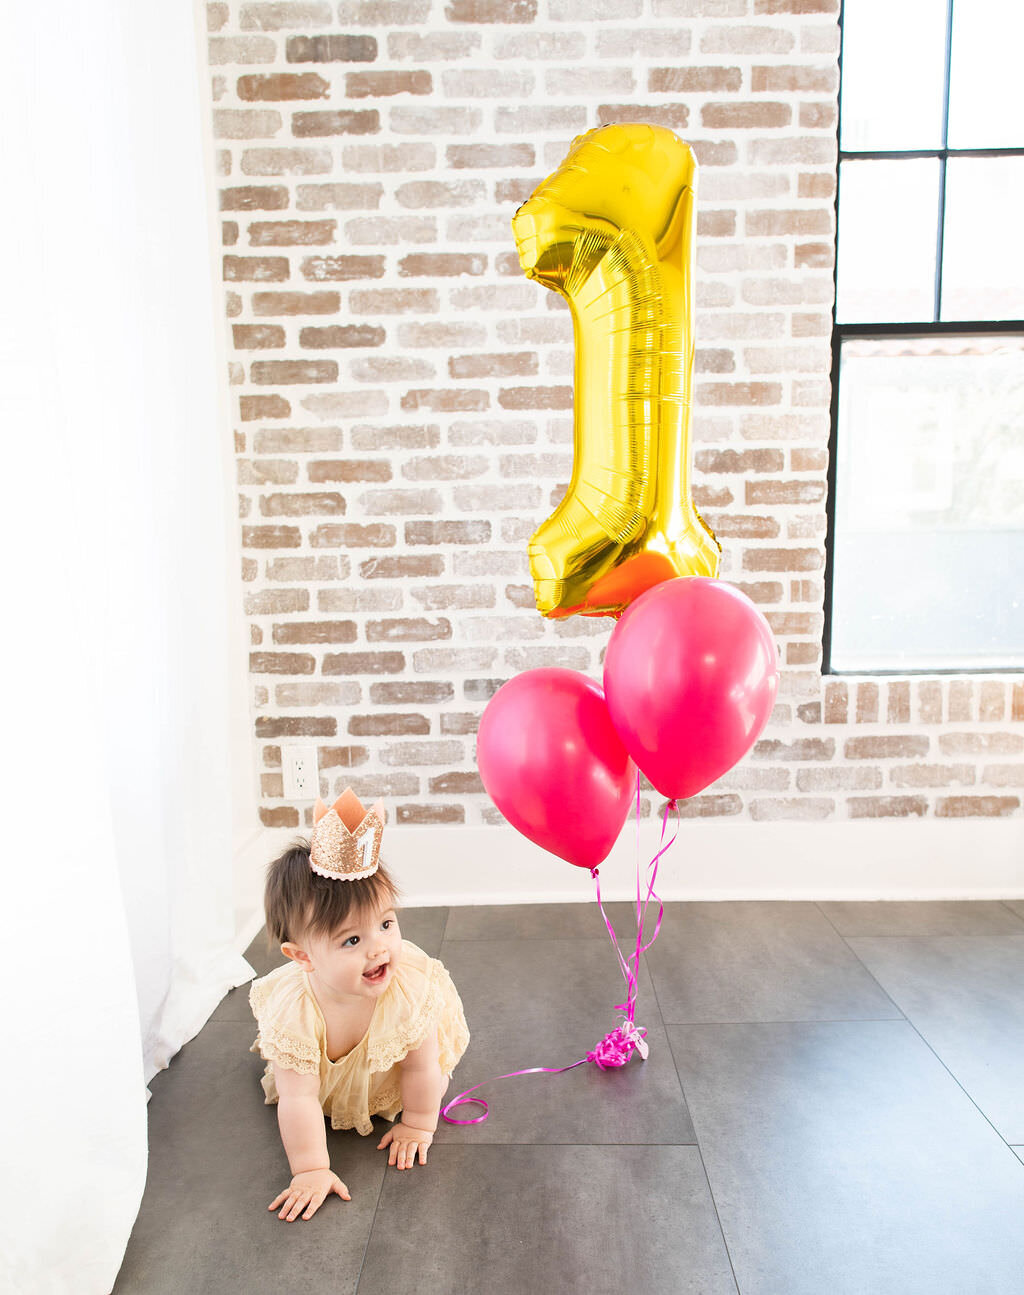 A baby with "1" and pink balloons next to her.